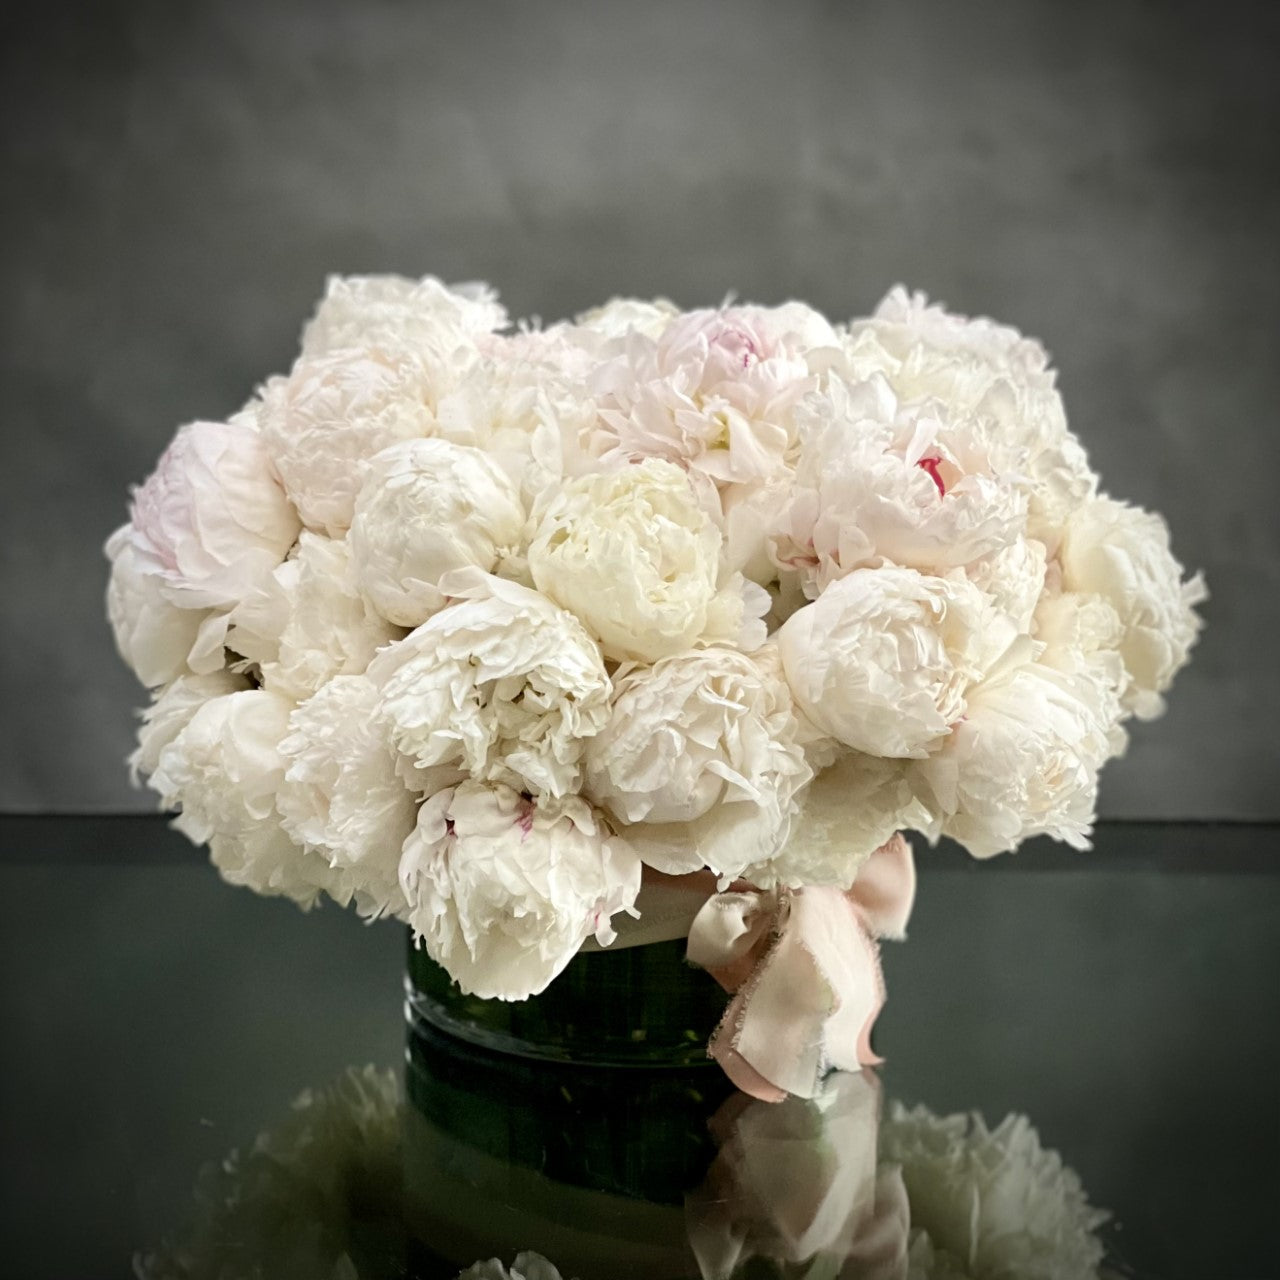 Peony Wonder presented by Beverly Hills Florist can also be made for same day delivery ! This over 50 white blush peony arrangement nested in a simple glass vase with a bow. Its beautiful in itself without any other floral. A beautiful sentiment for Birthdays, Welcome Homes, Thank you, Thinking of you and sympathies. 